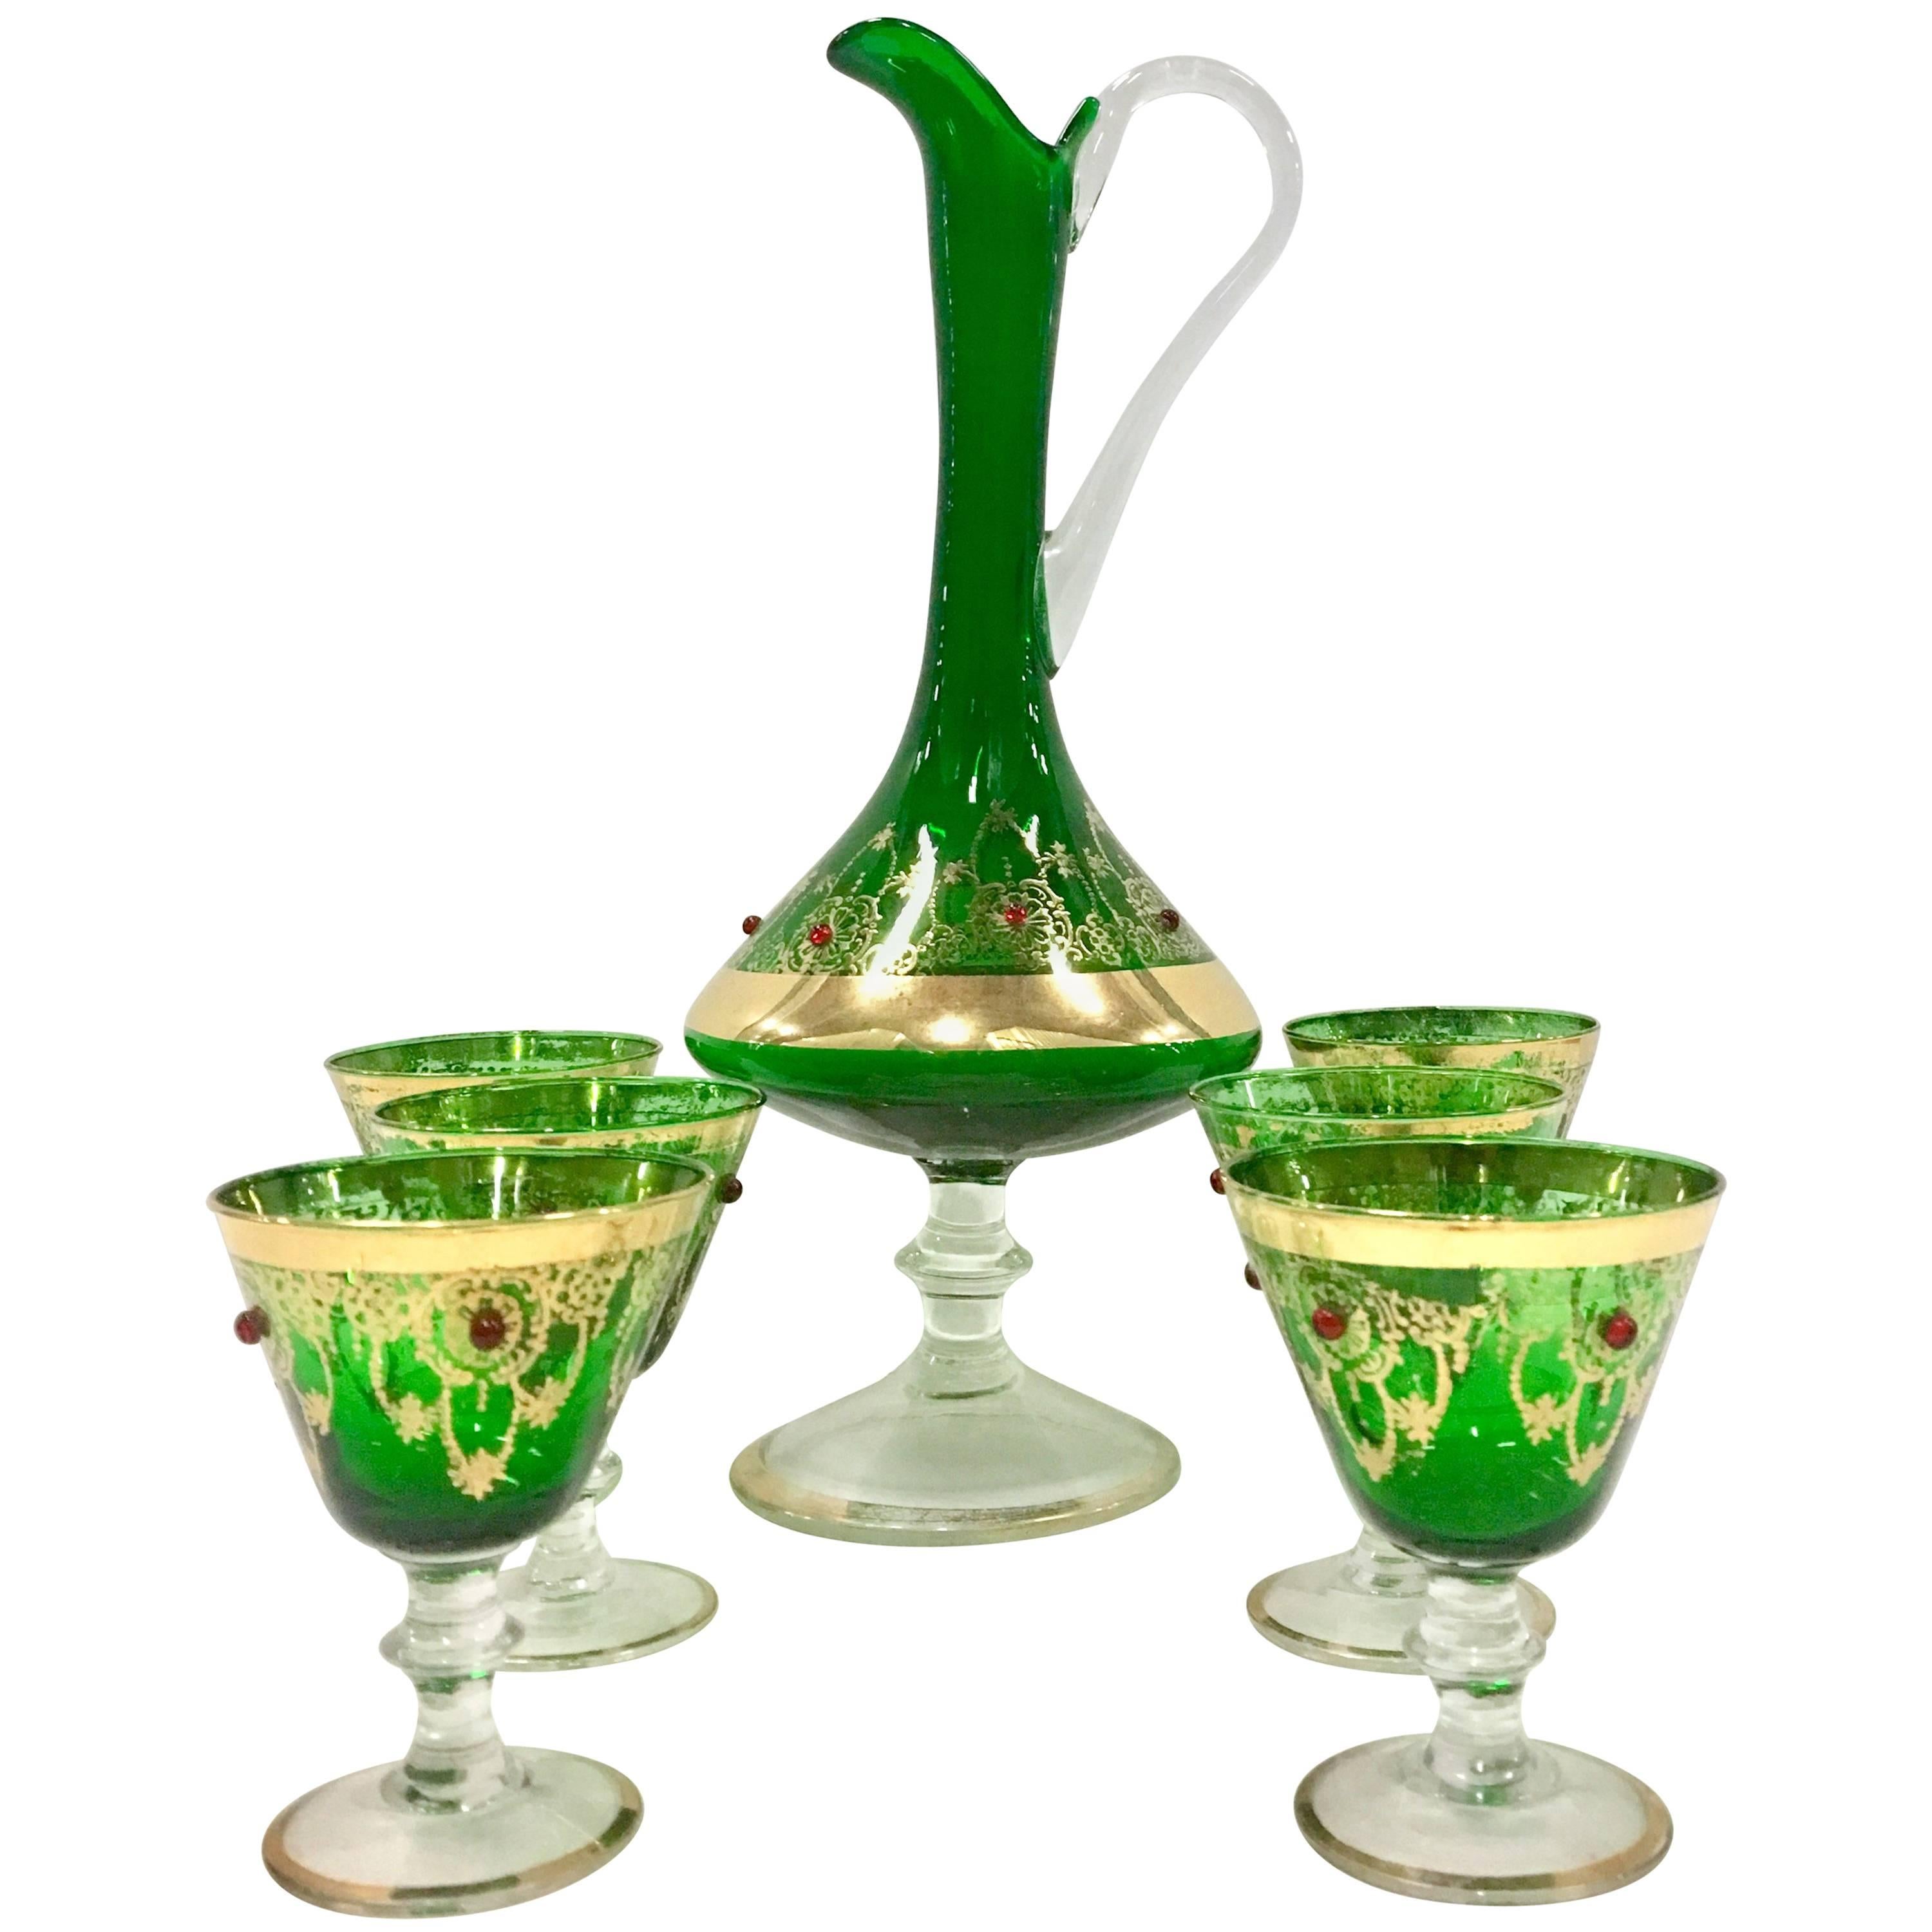 Midcentury Italian 22-karat gold and emerald green Venetian blown glass drinks set of seven pieces. This hand painted seven piece set features a spouted and applied handled footed pitcher and six cordial footed stem glasses. The 22-karat gold scroll